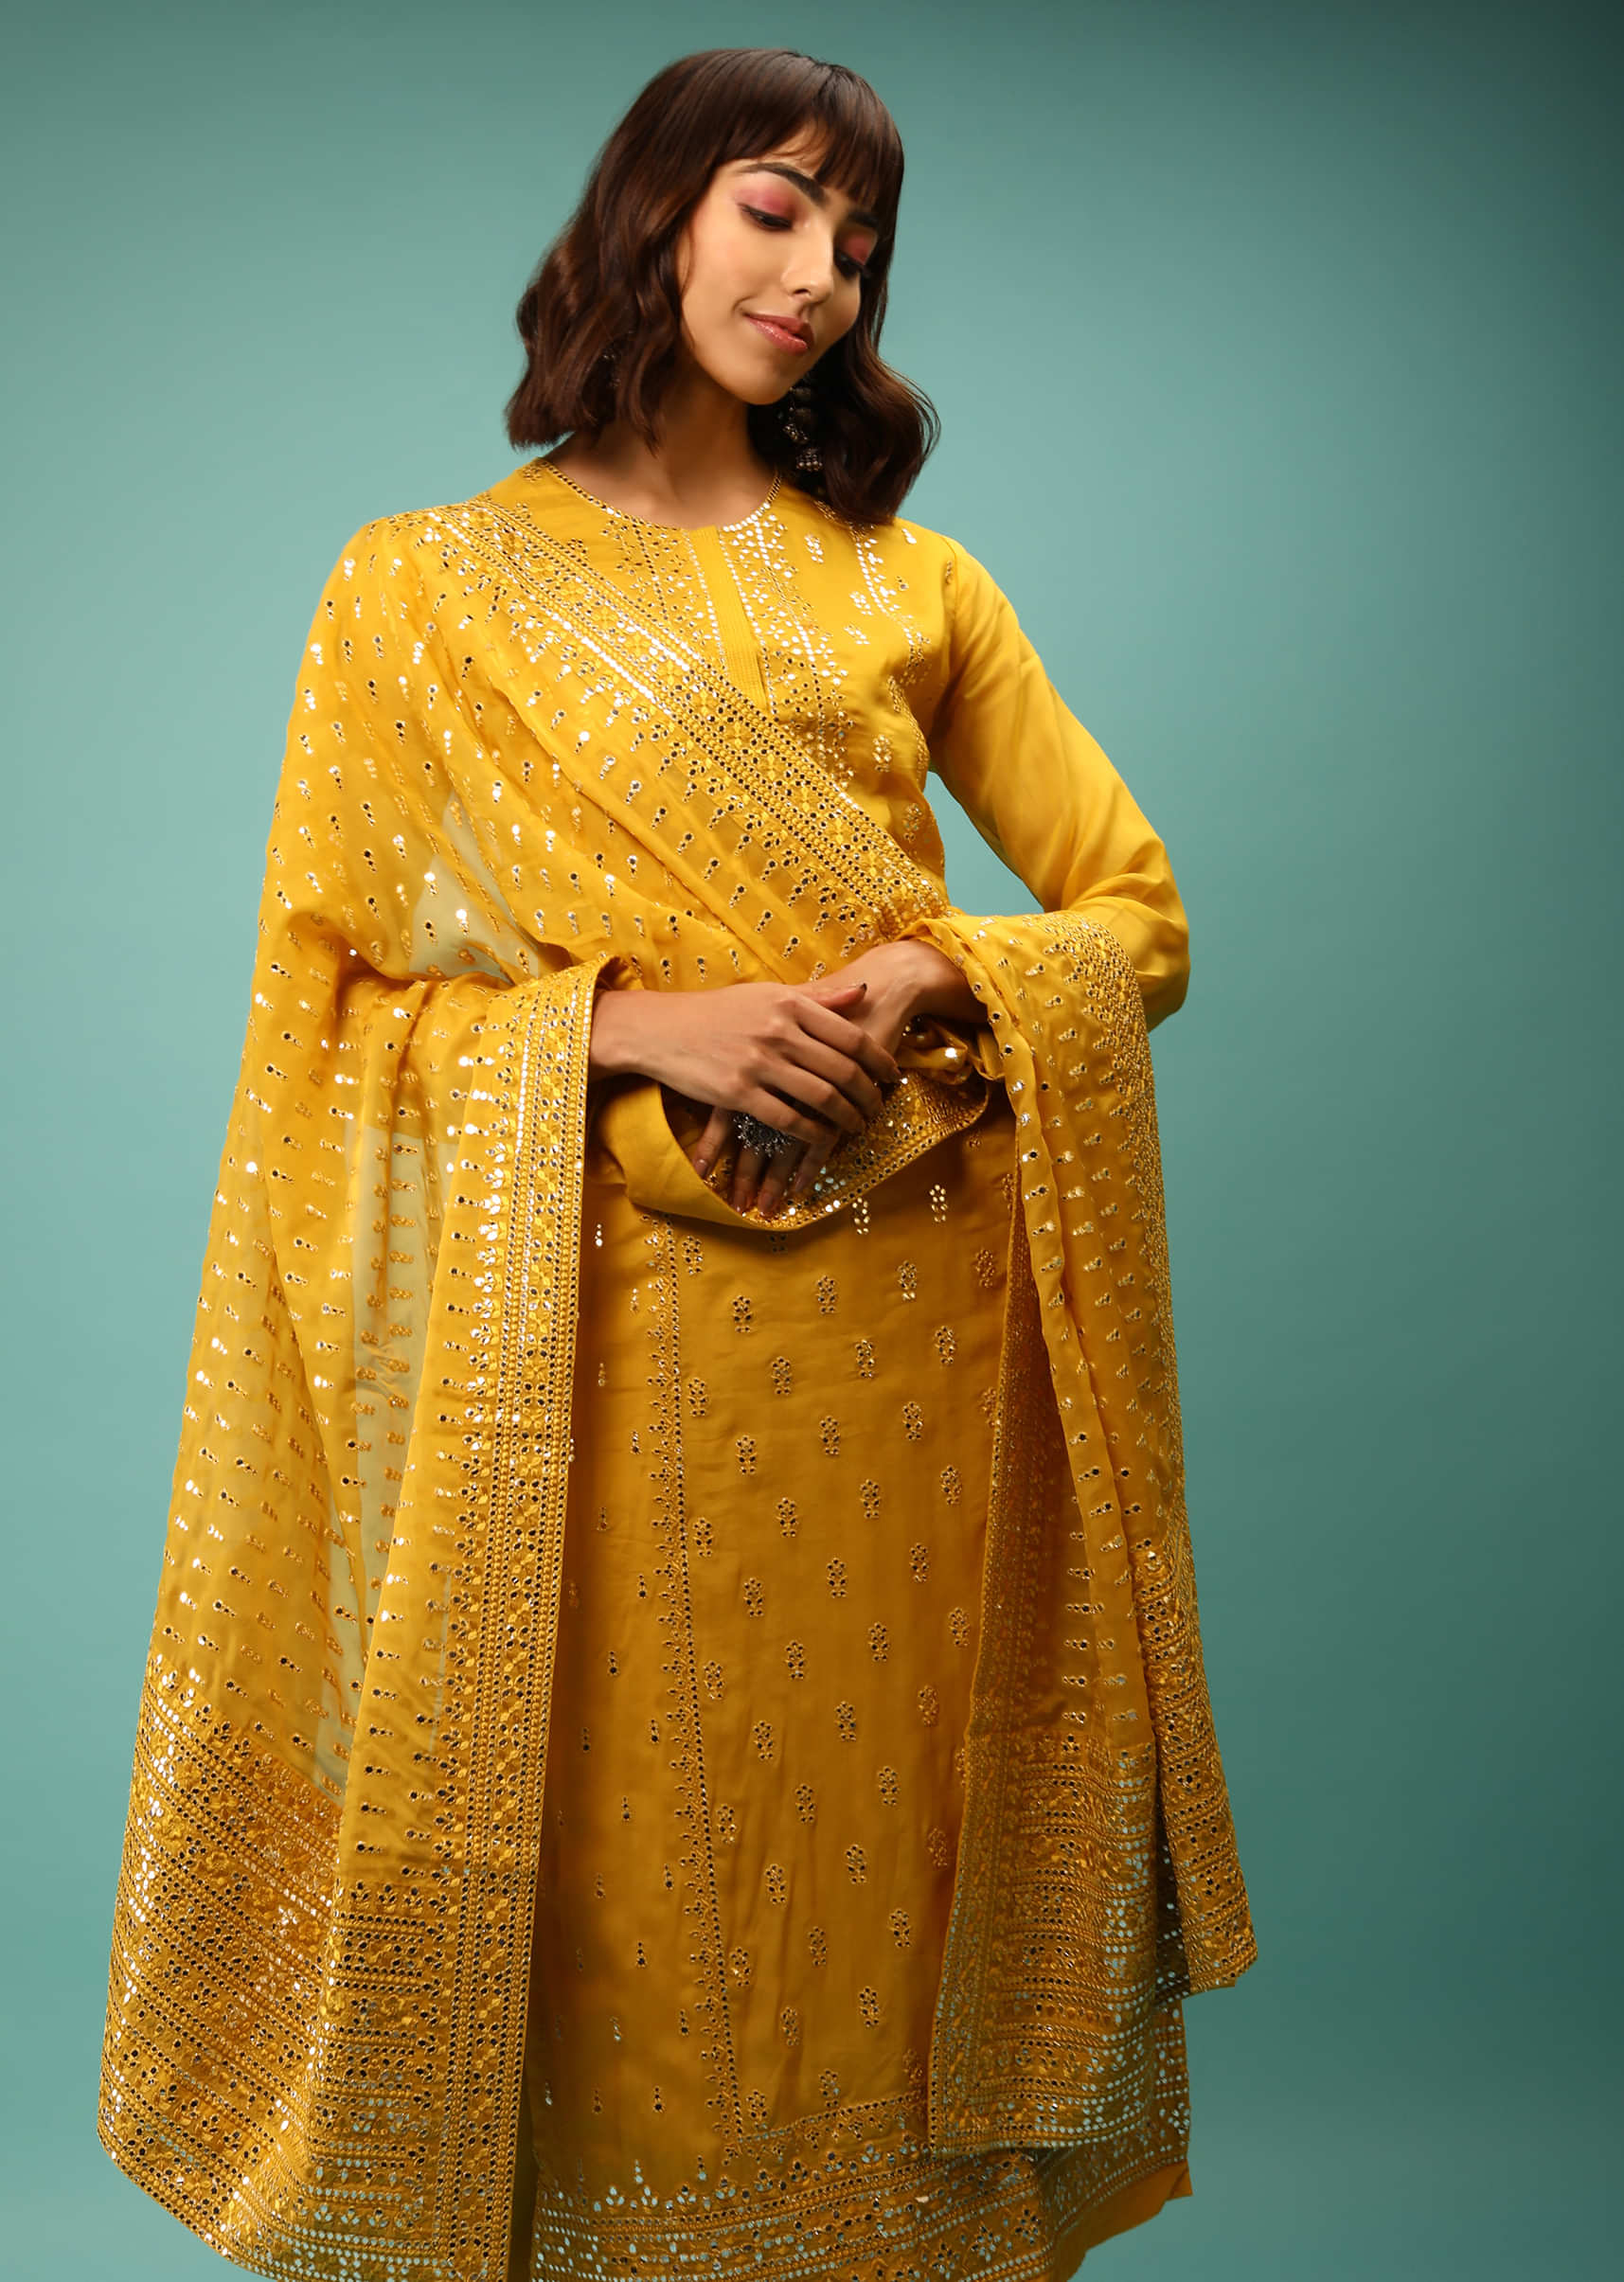 Sulphur Yellow Straight Cut Suit With Full Sleeves And Mirror Embroidered Floral Buttis 